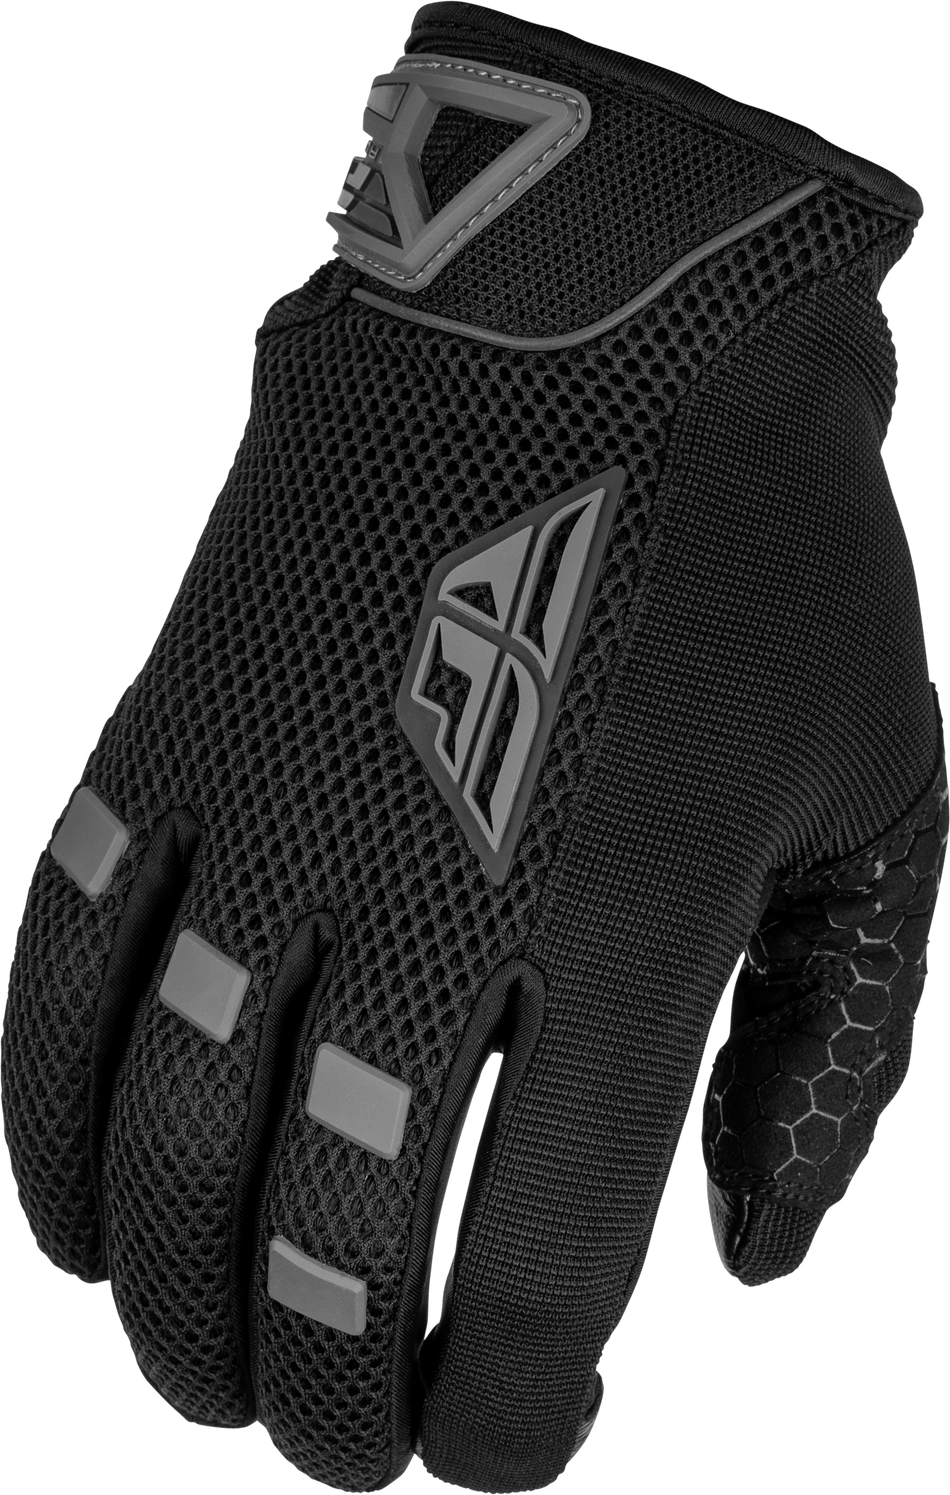 FLY RACING Women's Coolpro Gloves Black Md 476-6214M